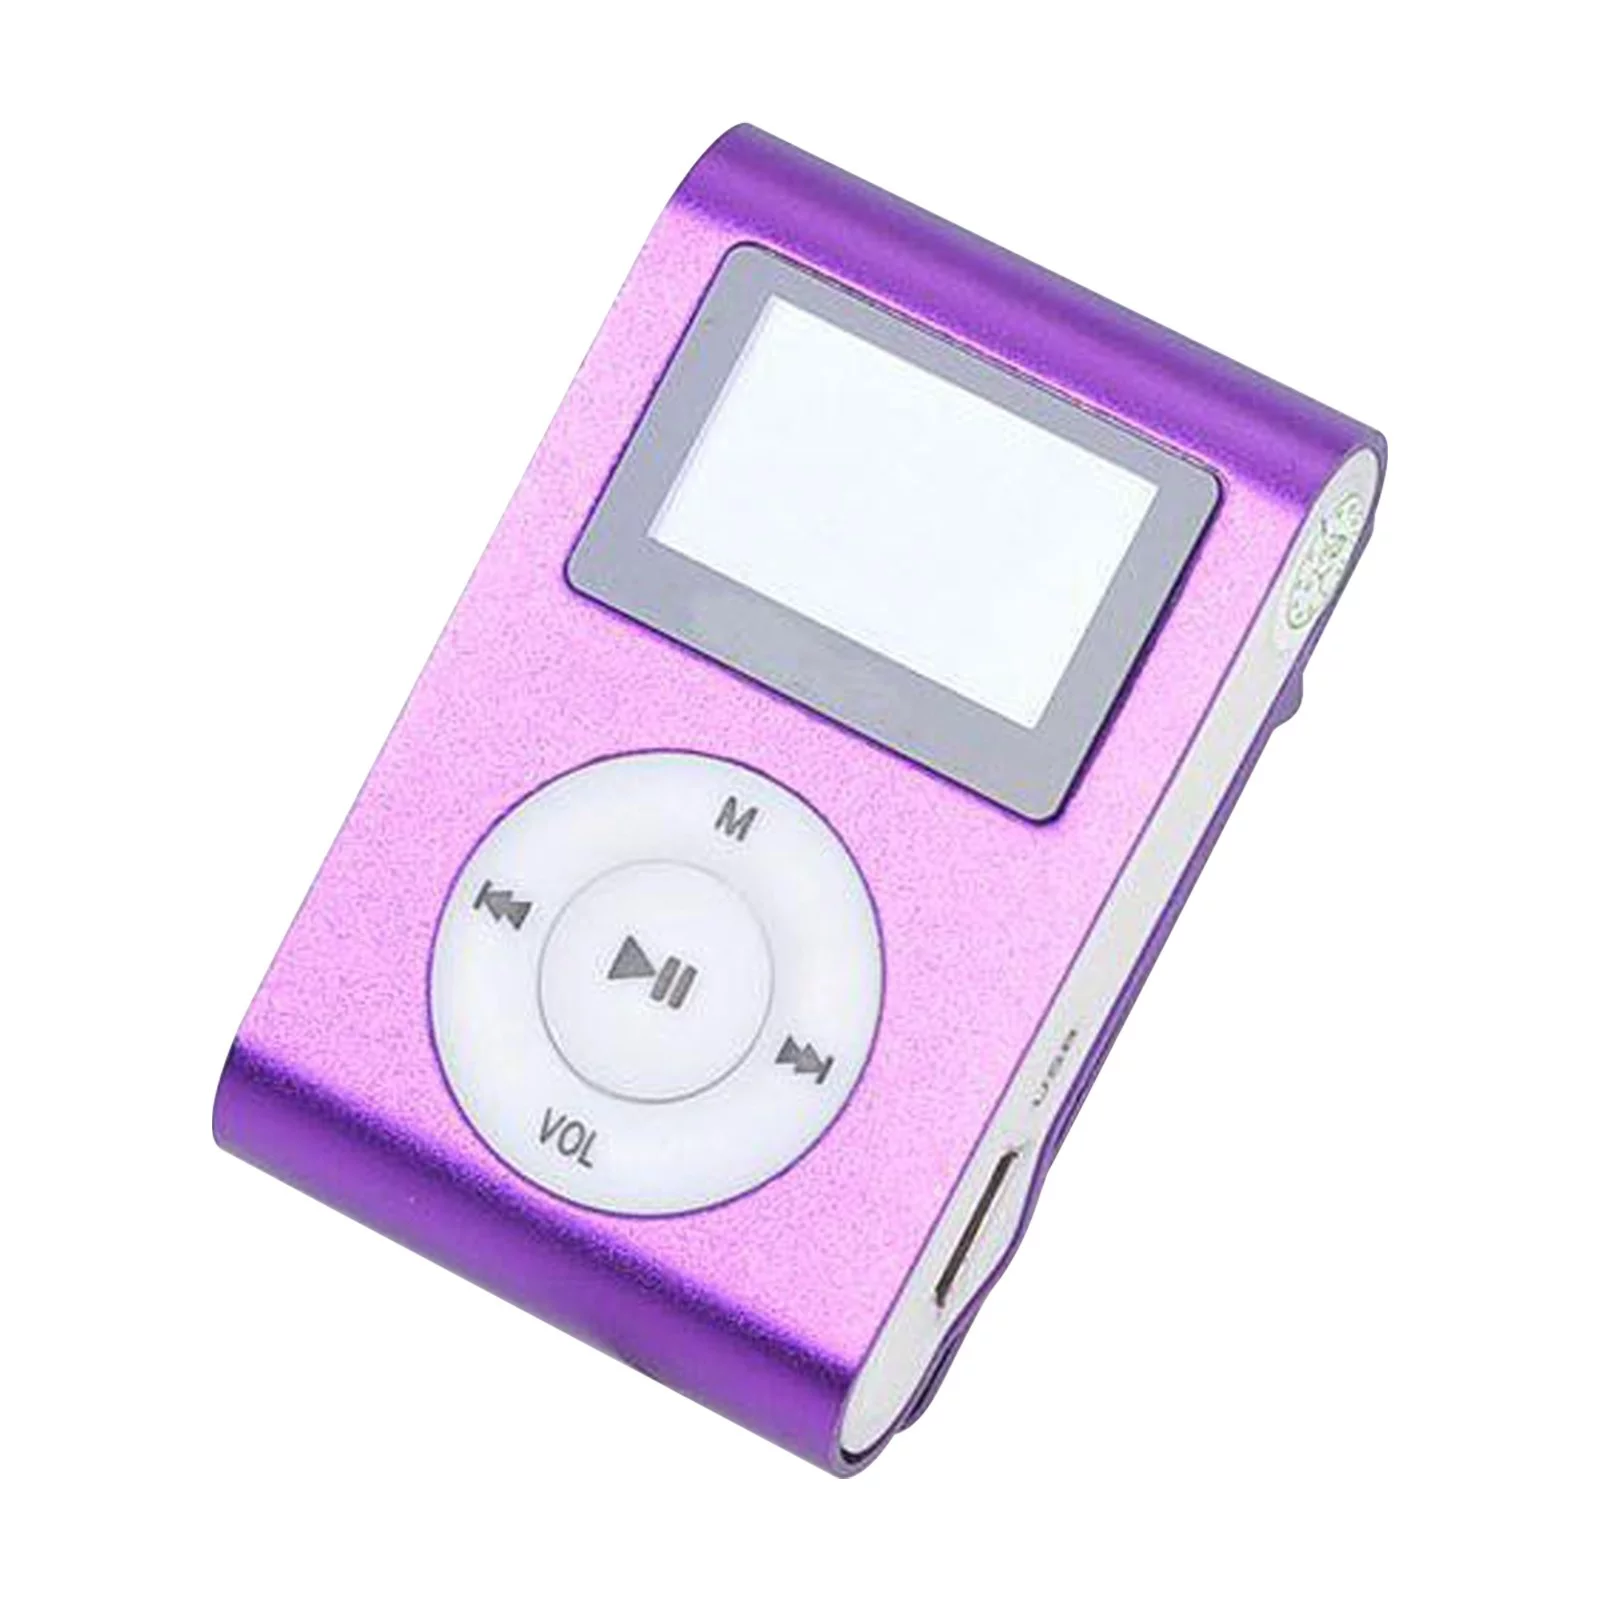 Lhked Portable MP3 Player, 1PC USB LCD Screen MP3 Support Sports Music Player,Clearance Sales Today Deals Prime